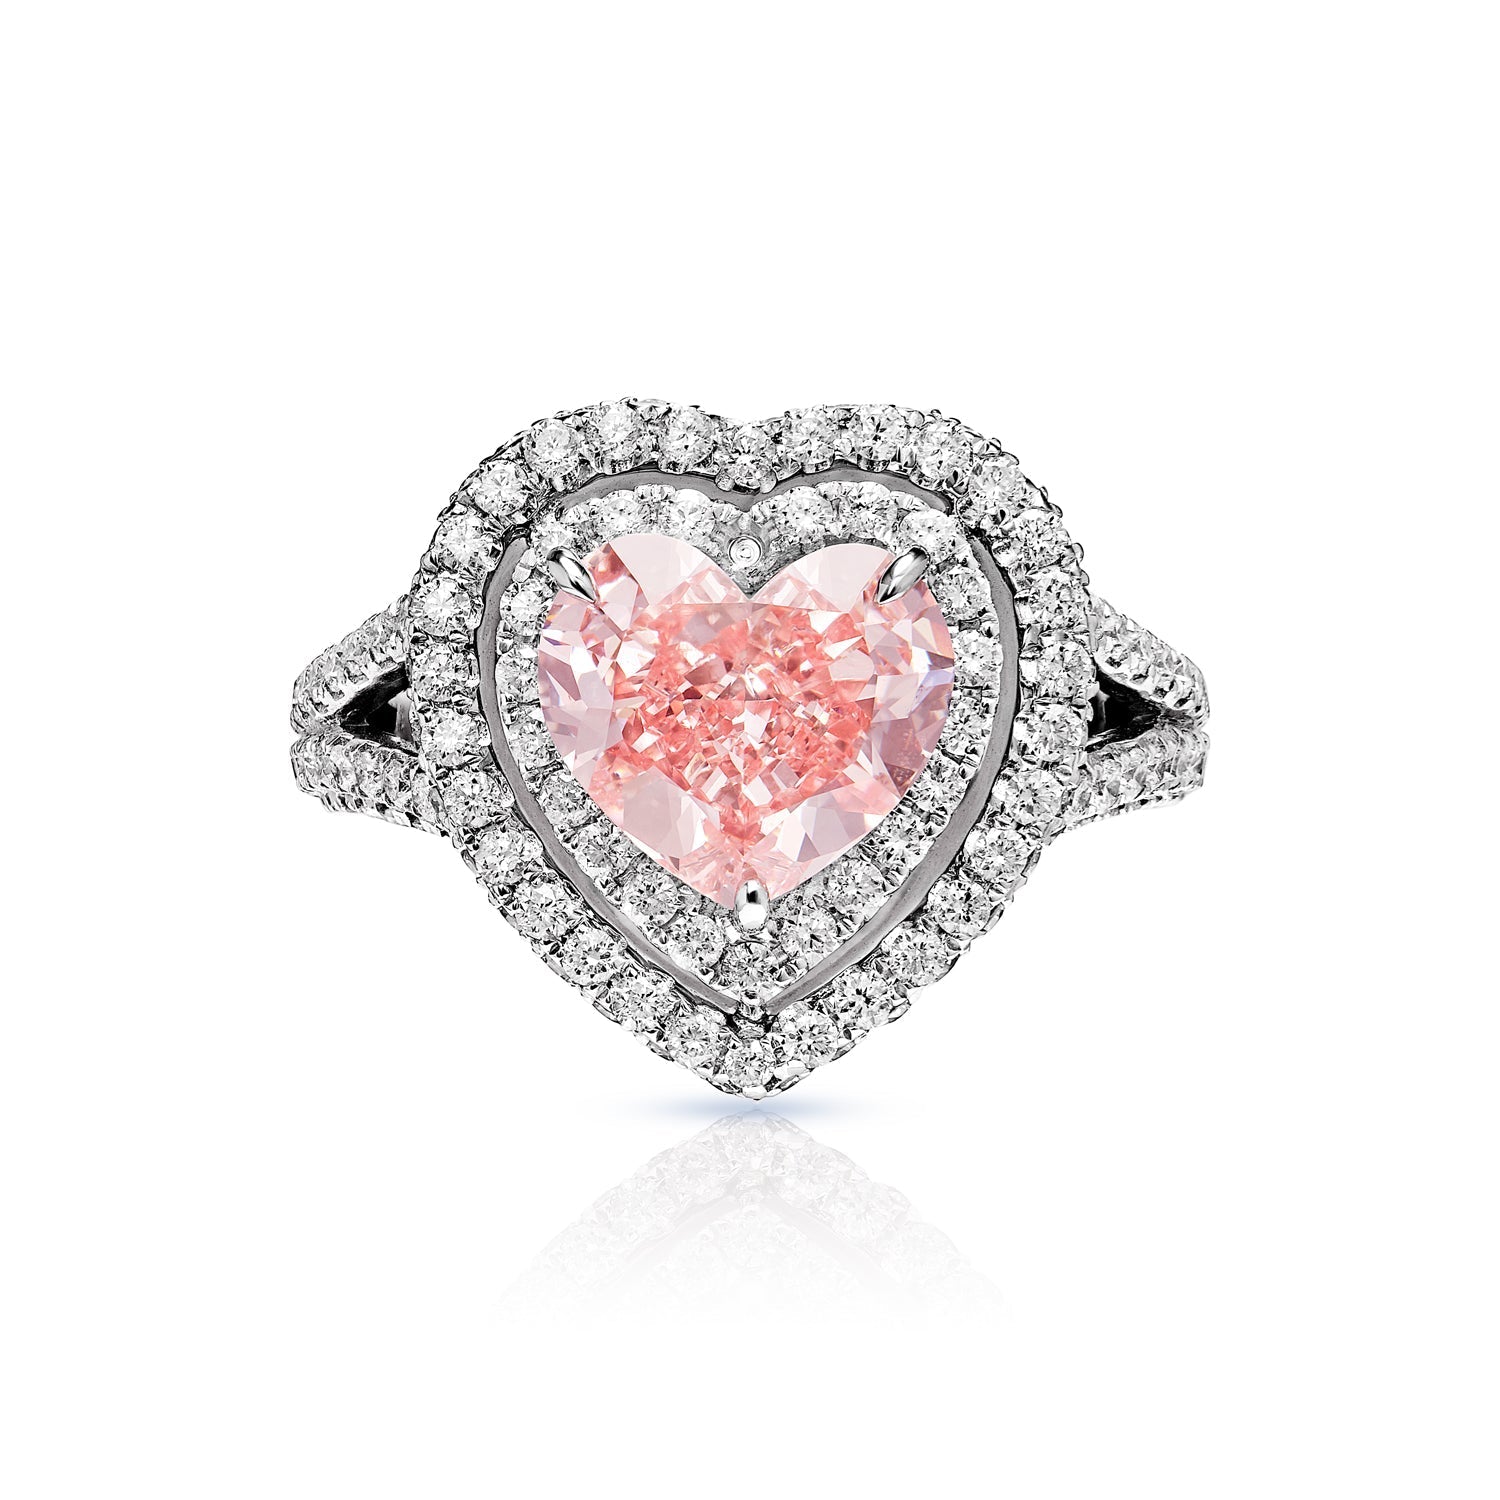 Cecilia 4 Carat Heart Shape Earth Mined Fancy Vivid Pink Diamond Engagement Ring in 18 Karat White Gold Front View